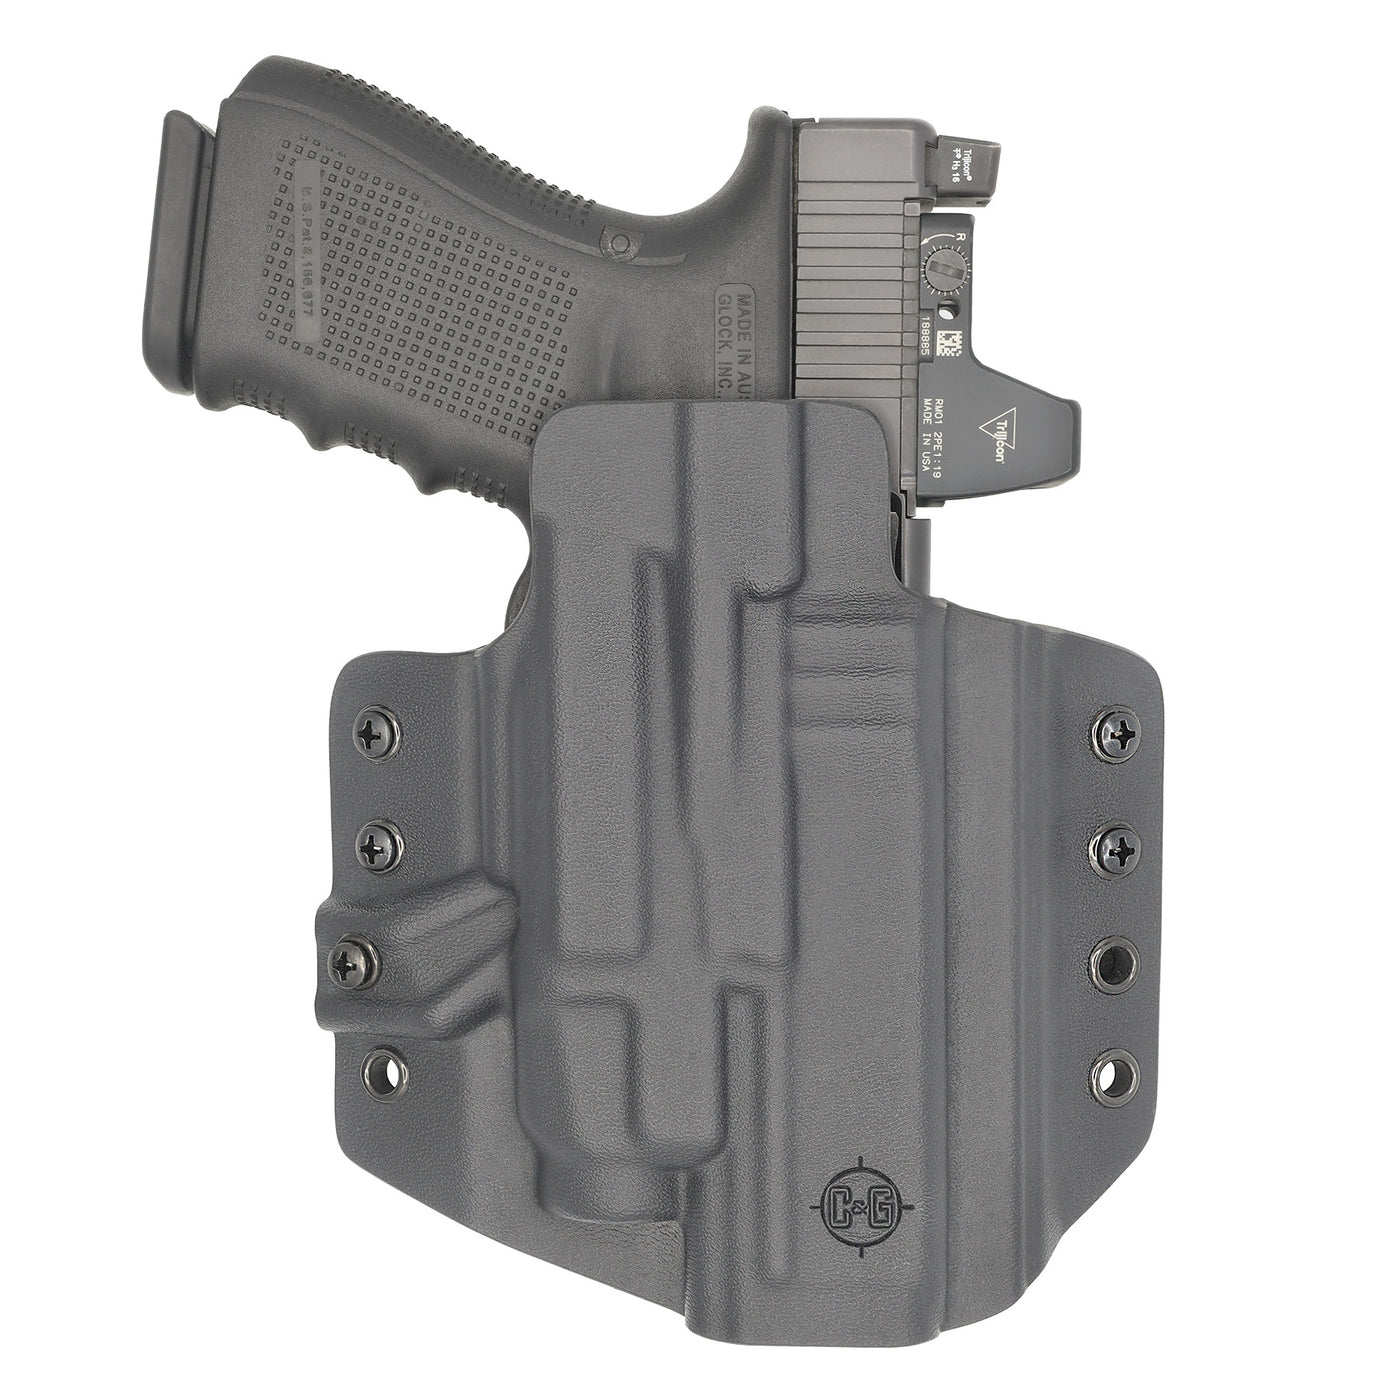 C&G Holsters quickship OWB Tactical Shadow Systems Streamlight TLR7 holstered